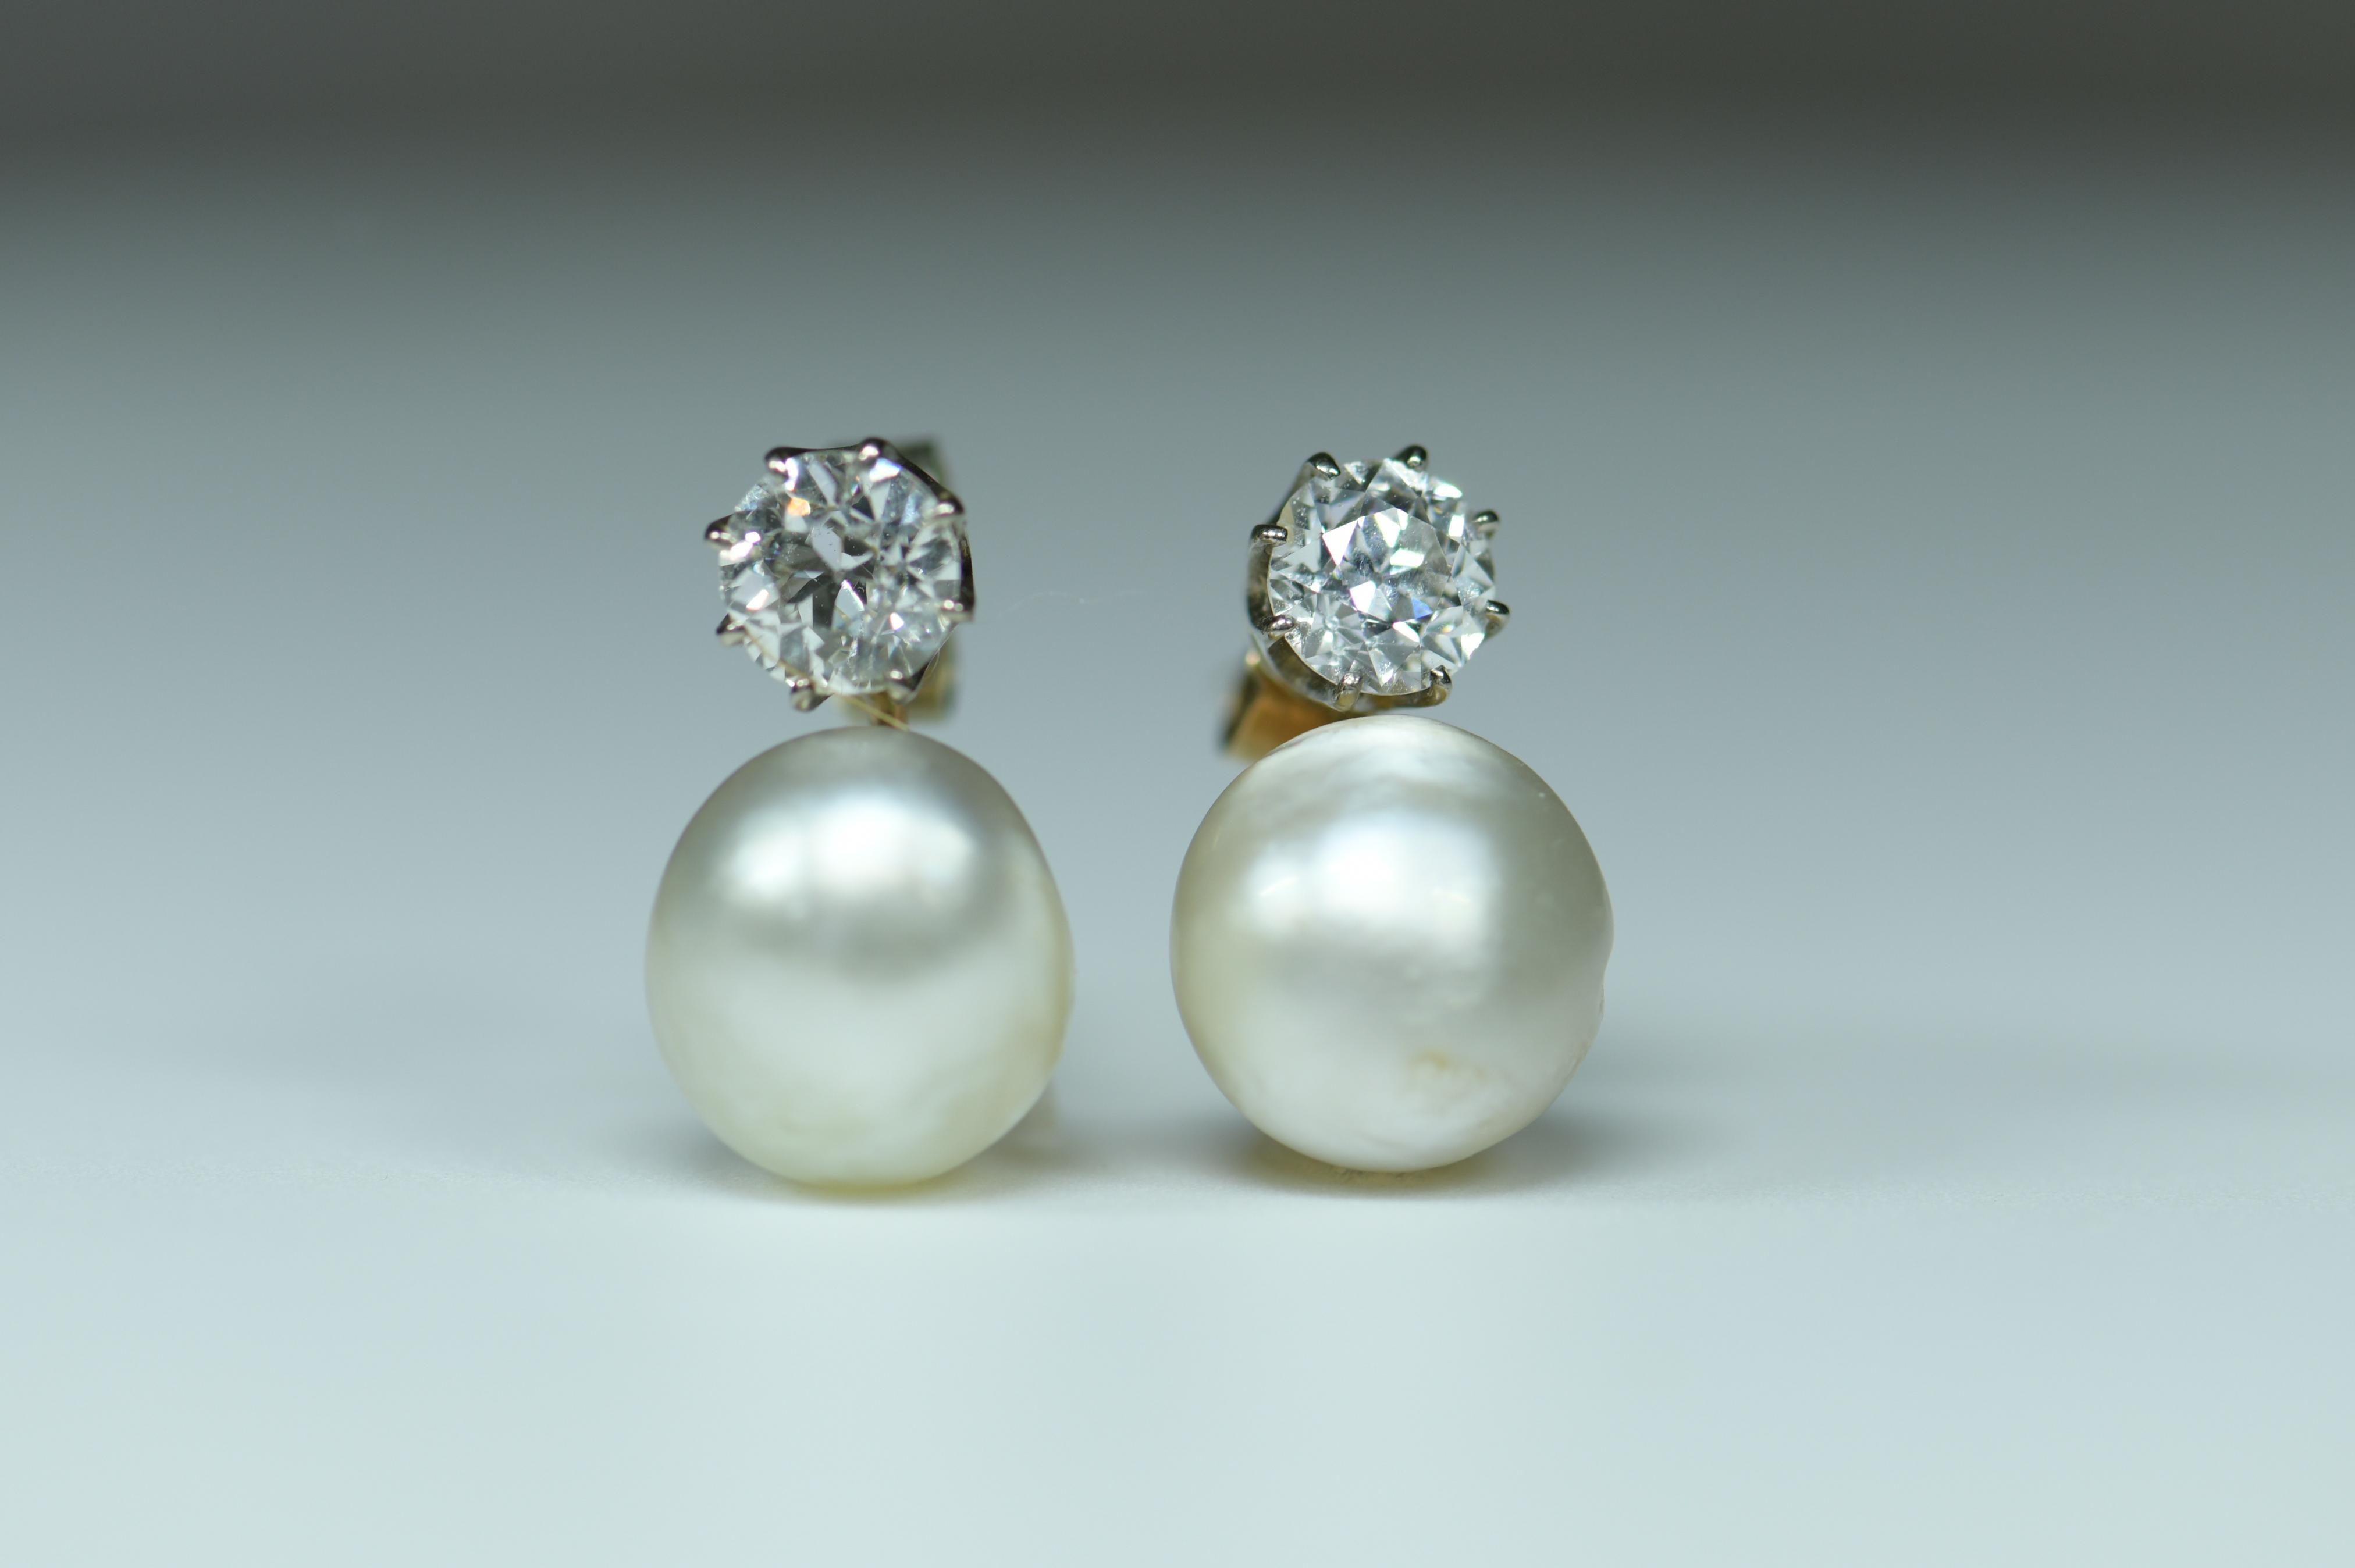 These glamorous natural pearl diamond earrings feature two well-matched beautiful natural pearls, measuring 10.2 x 9.8 x 7.2 and 10.2 x 9.4 x 7.9mm in size. Both pearls are natural saltwater with no indications of treatment accompanied GCS